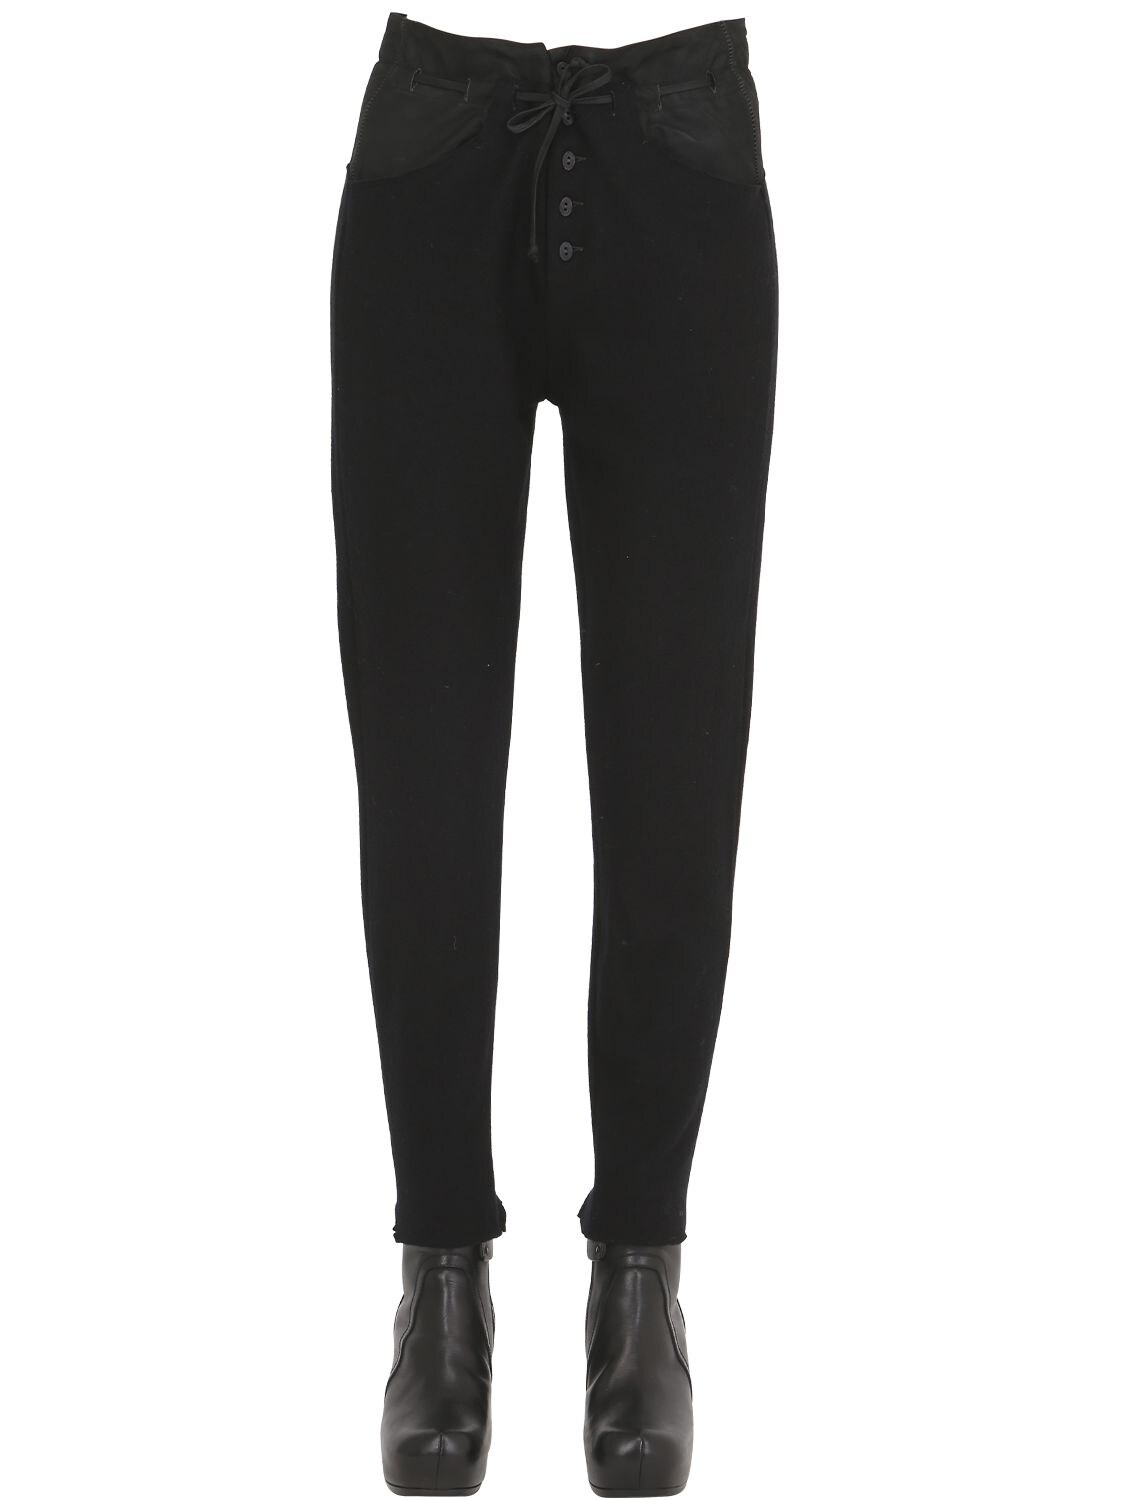 Transit Par-such Boiled Wool & Leather Pants In Black